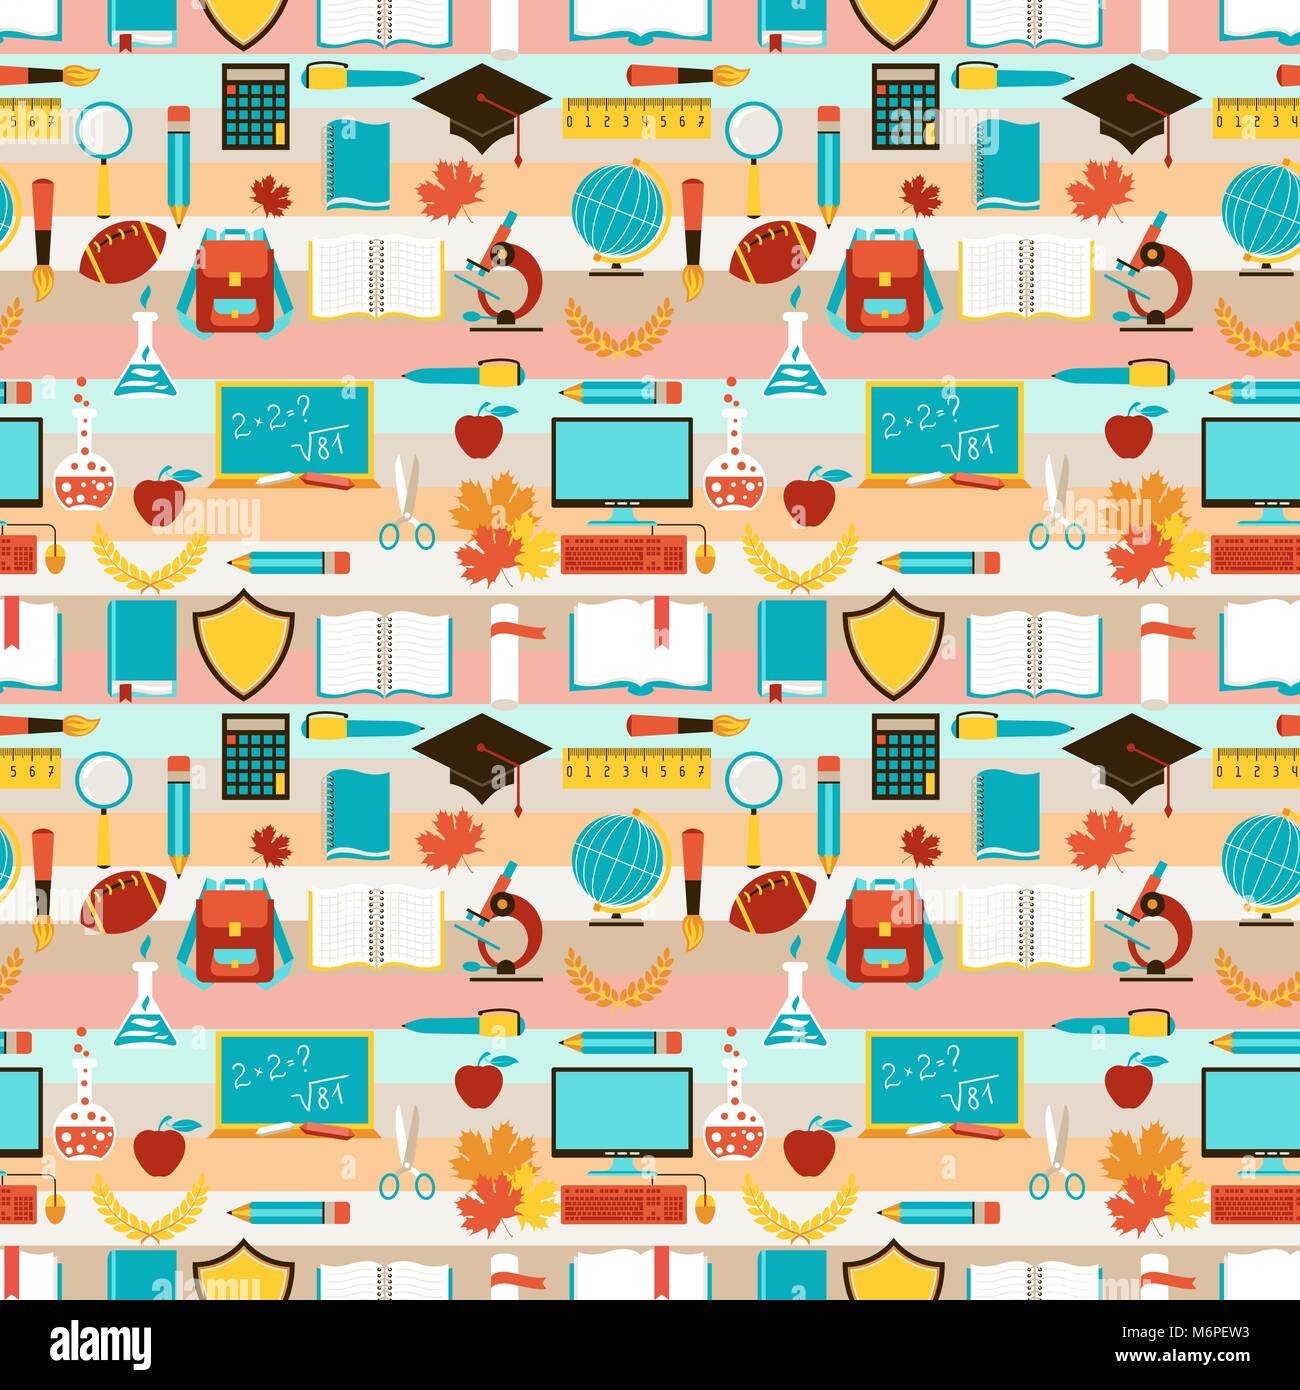 Seamless pattern with school icons Stock Vector